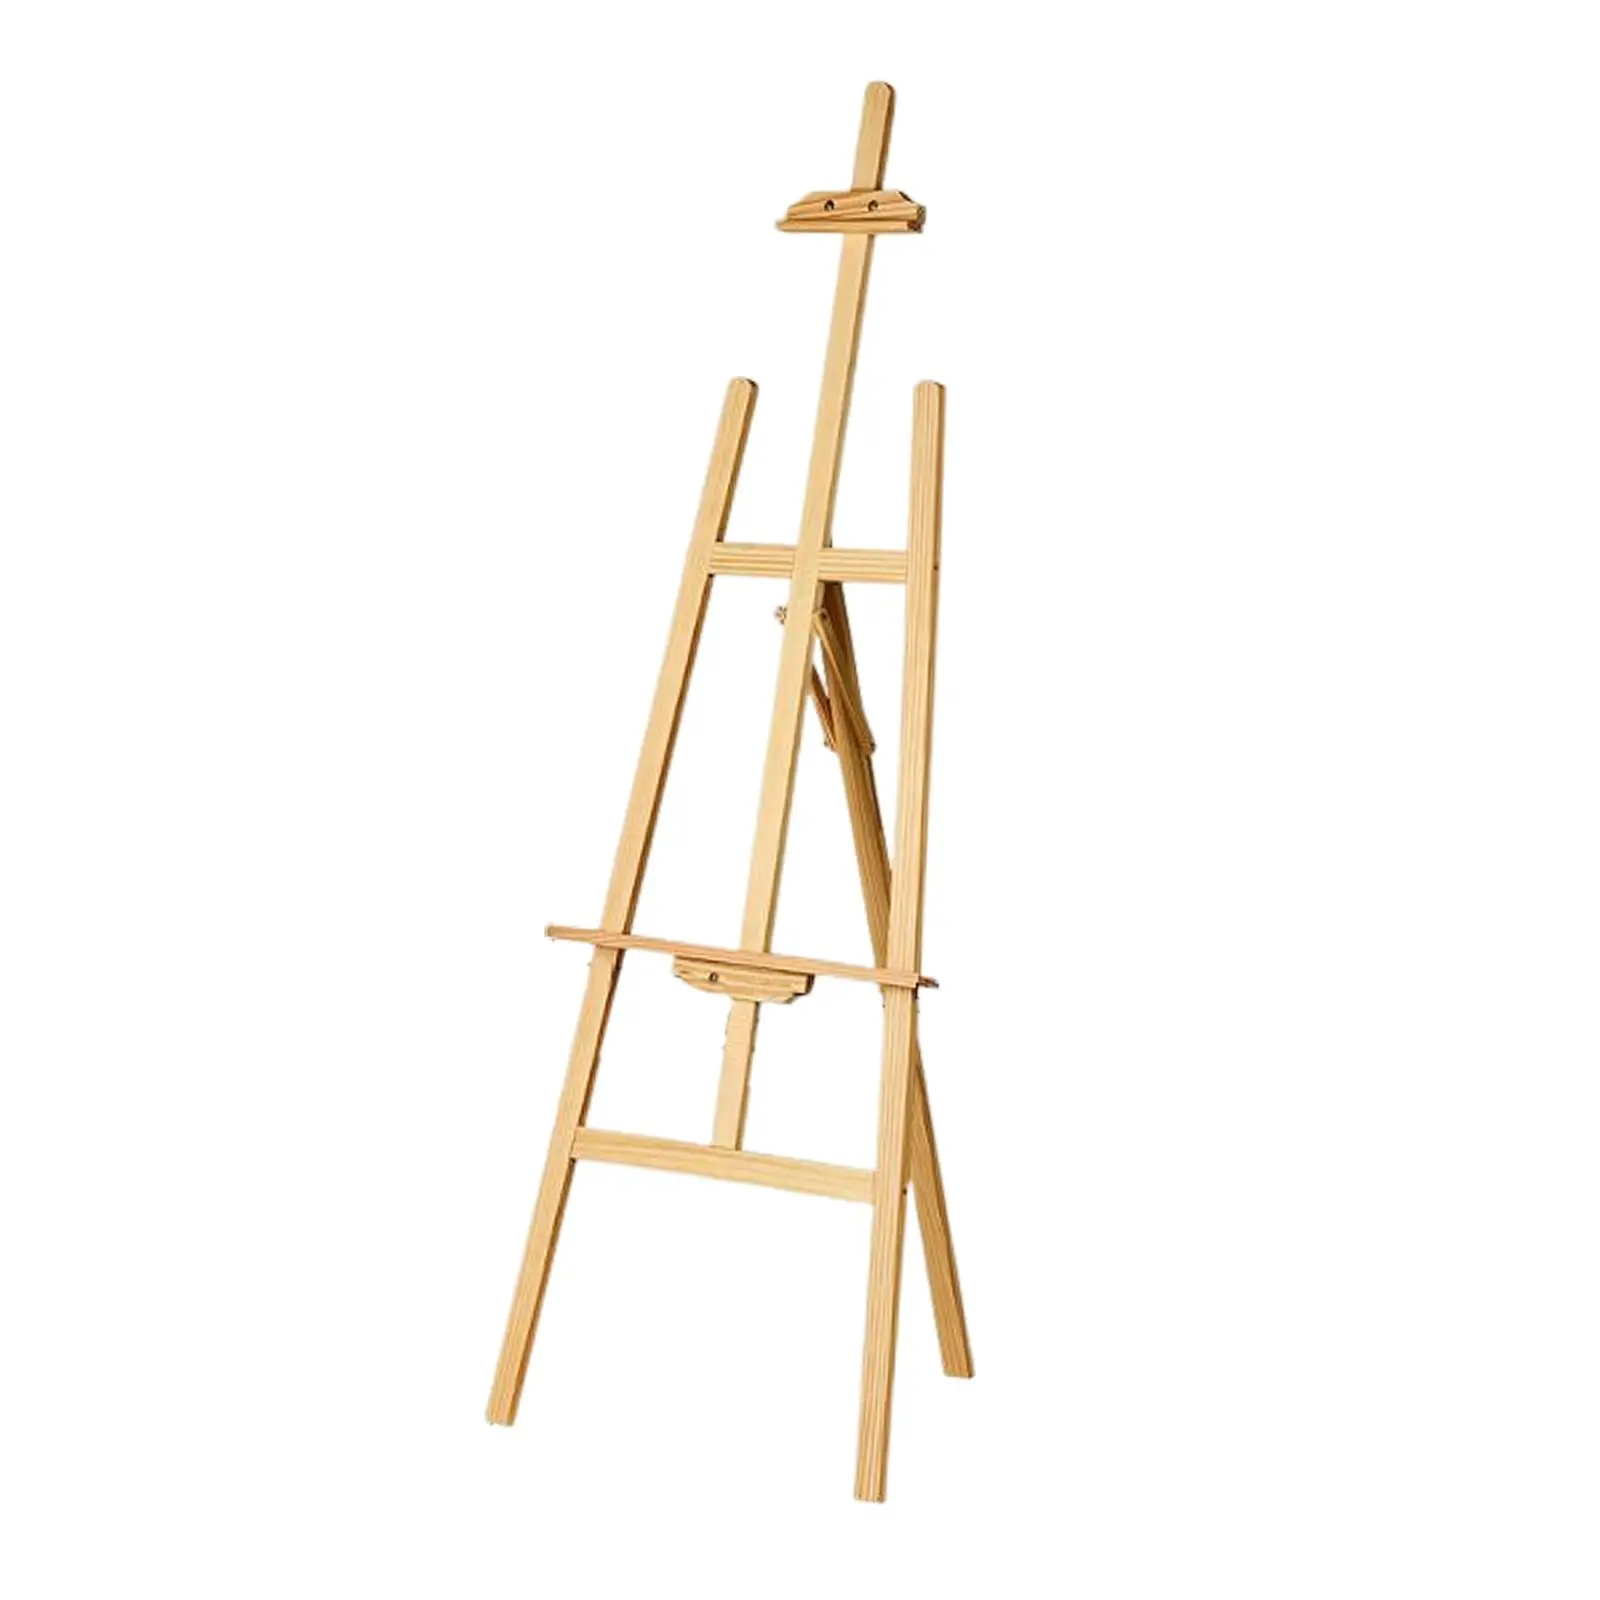 Portable Display Easel Adjustable Angles Artist Painting Studio Easel Holder Stand for Drawing Board Poster Art Wedding Supplies